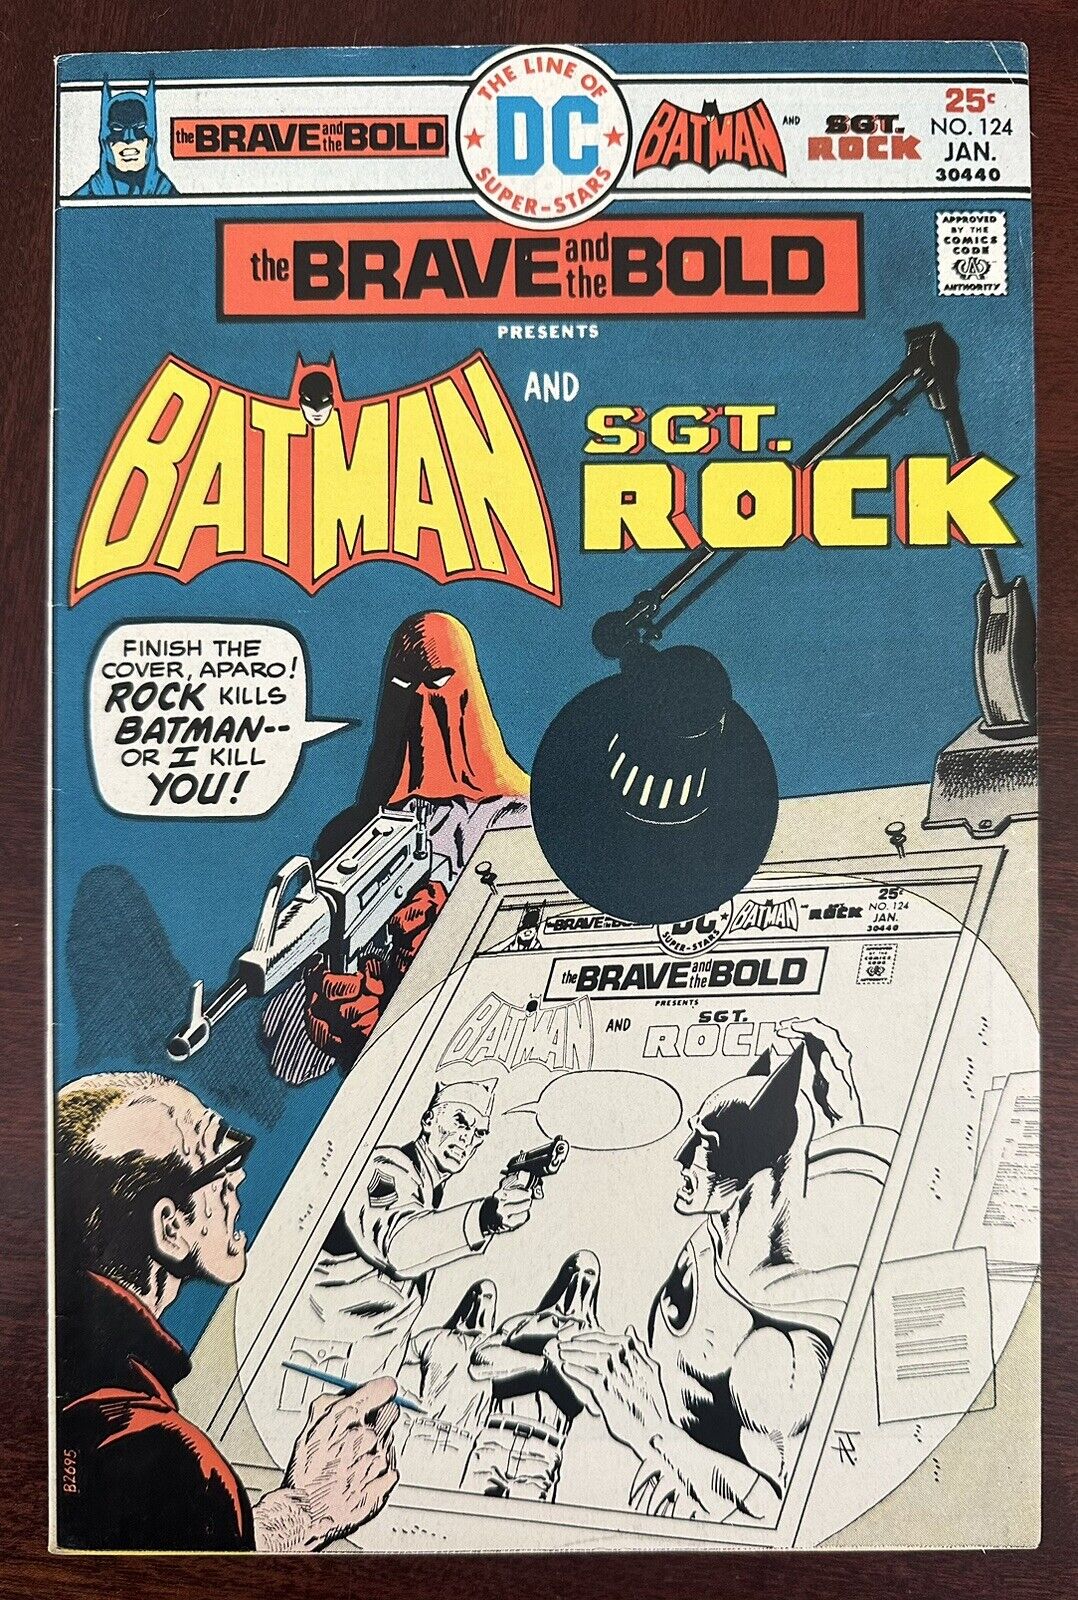 1976 - Brave and the Bold BATMAN and SGT. Rock #124